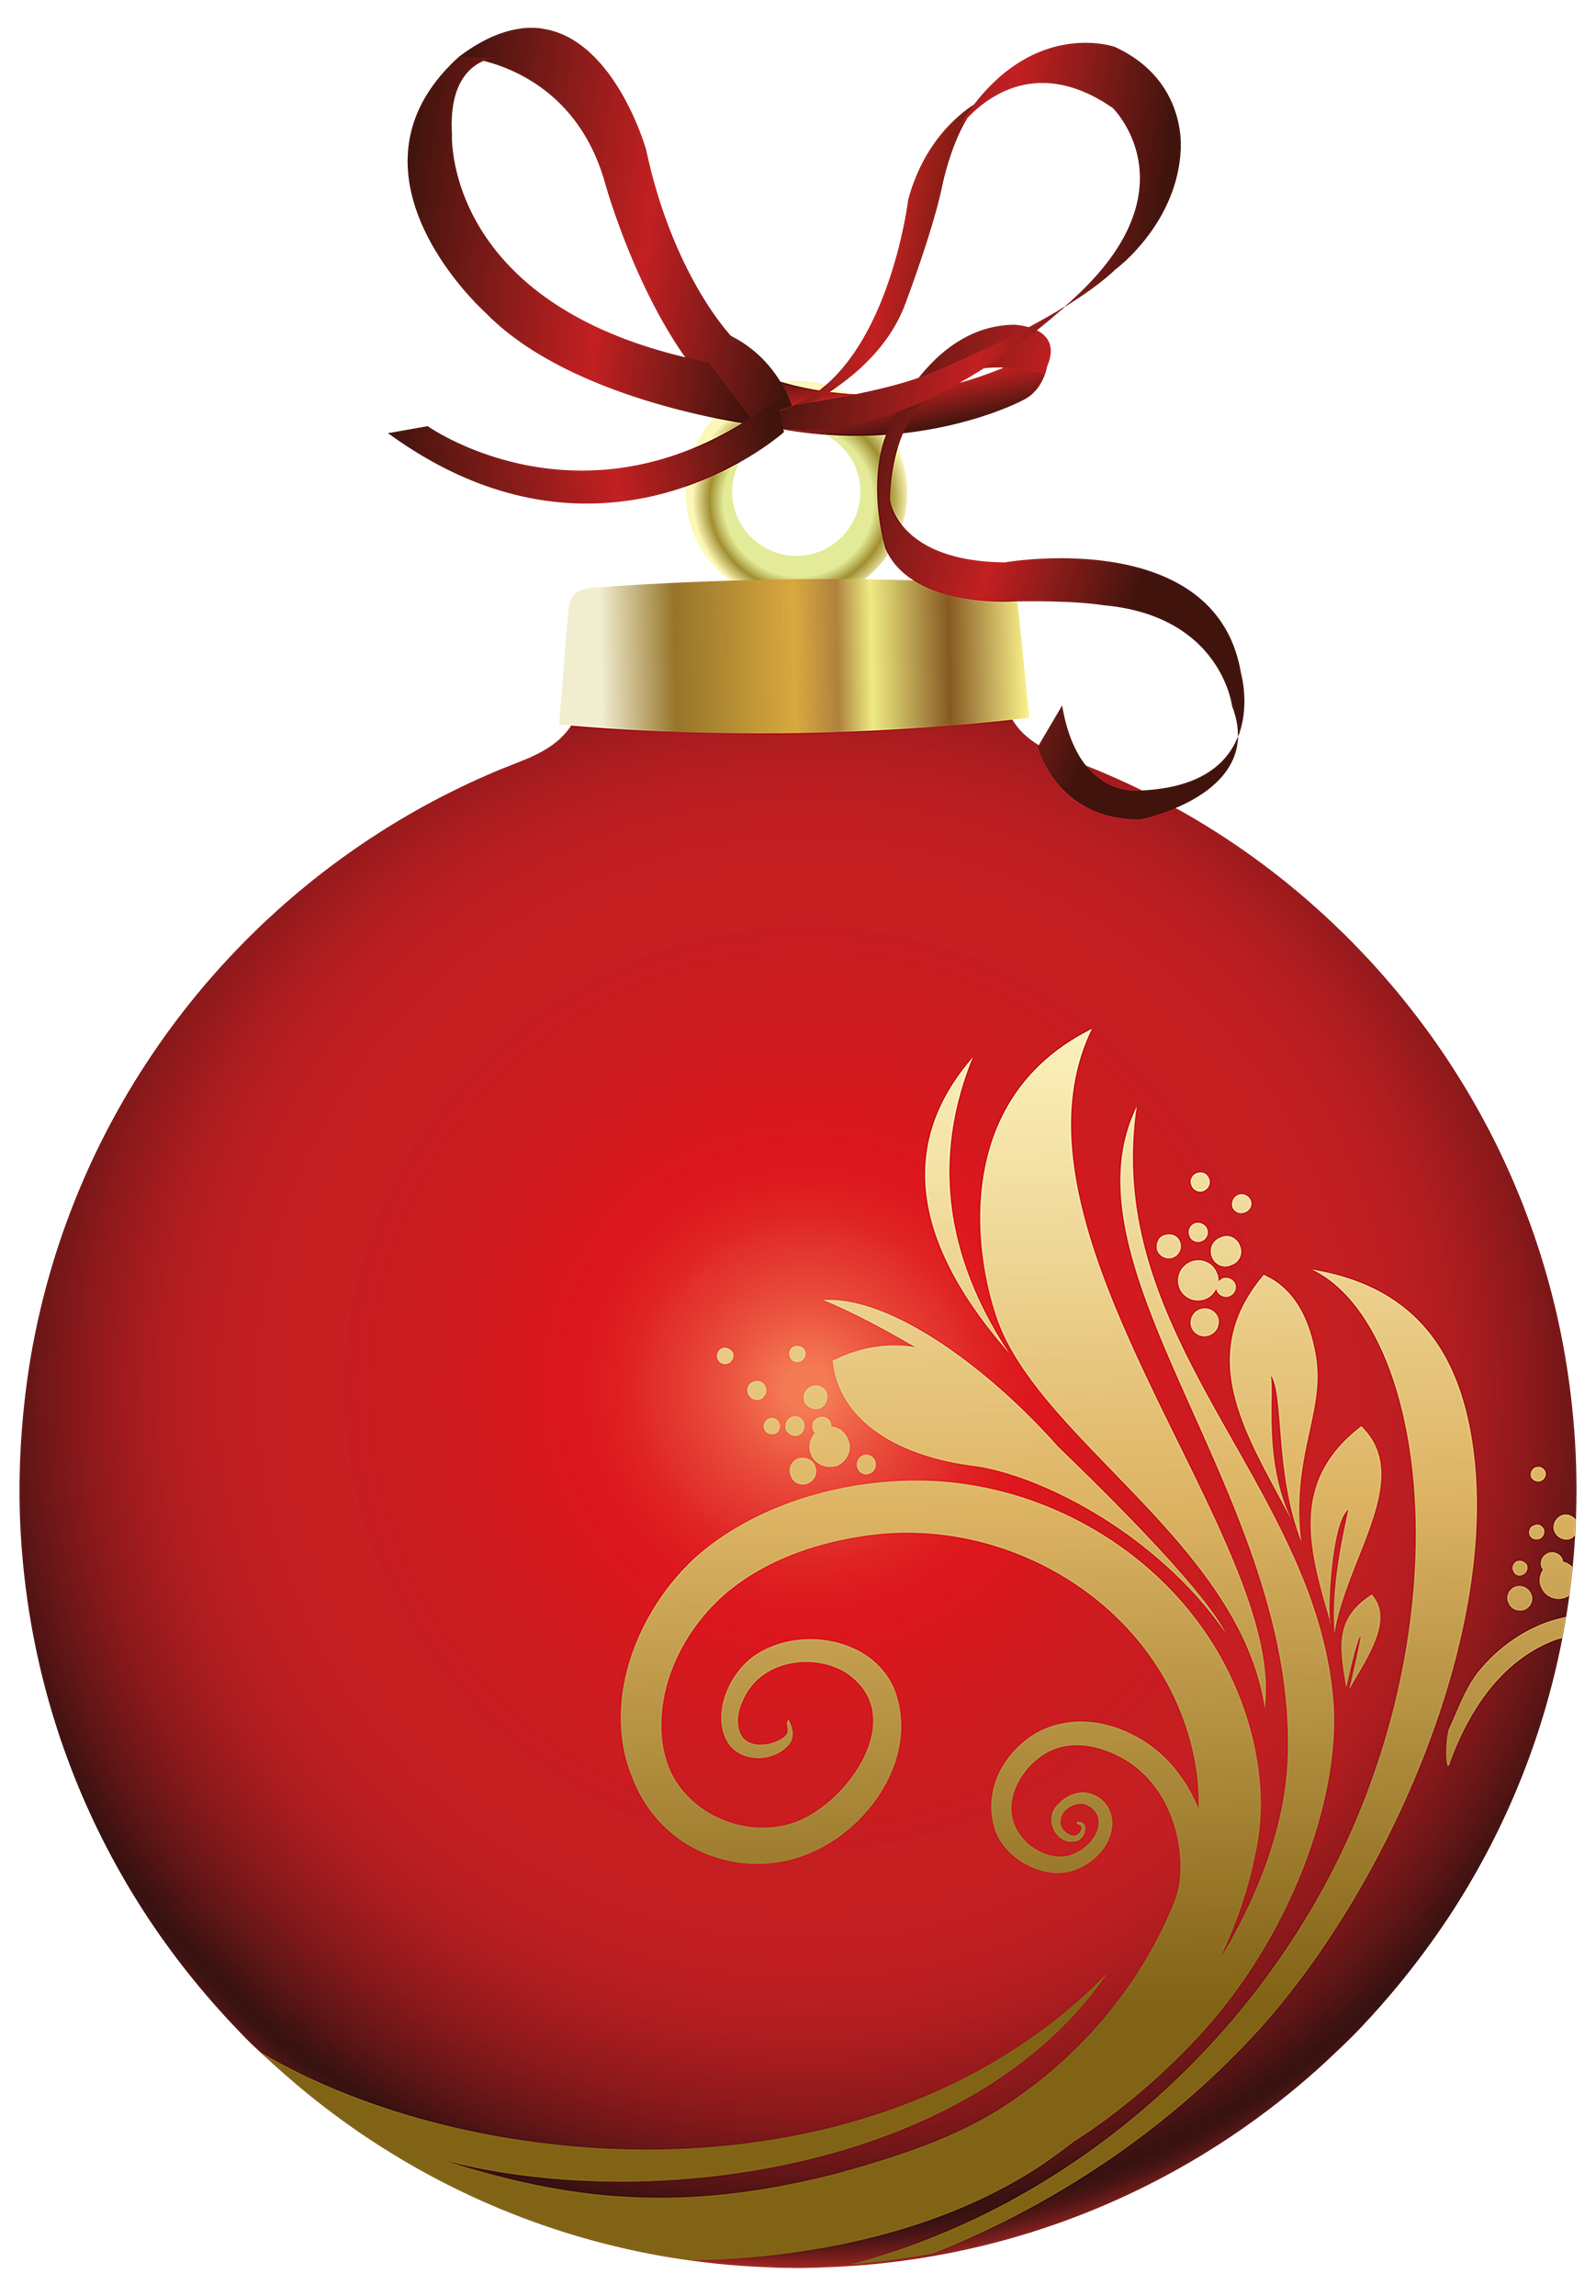 Red christmas ball with. Balls clipart decoration